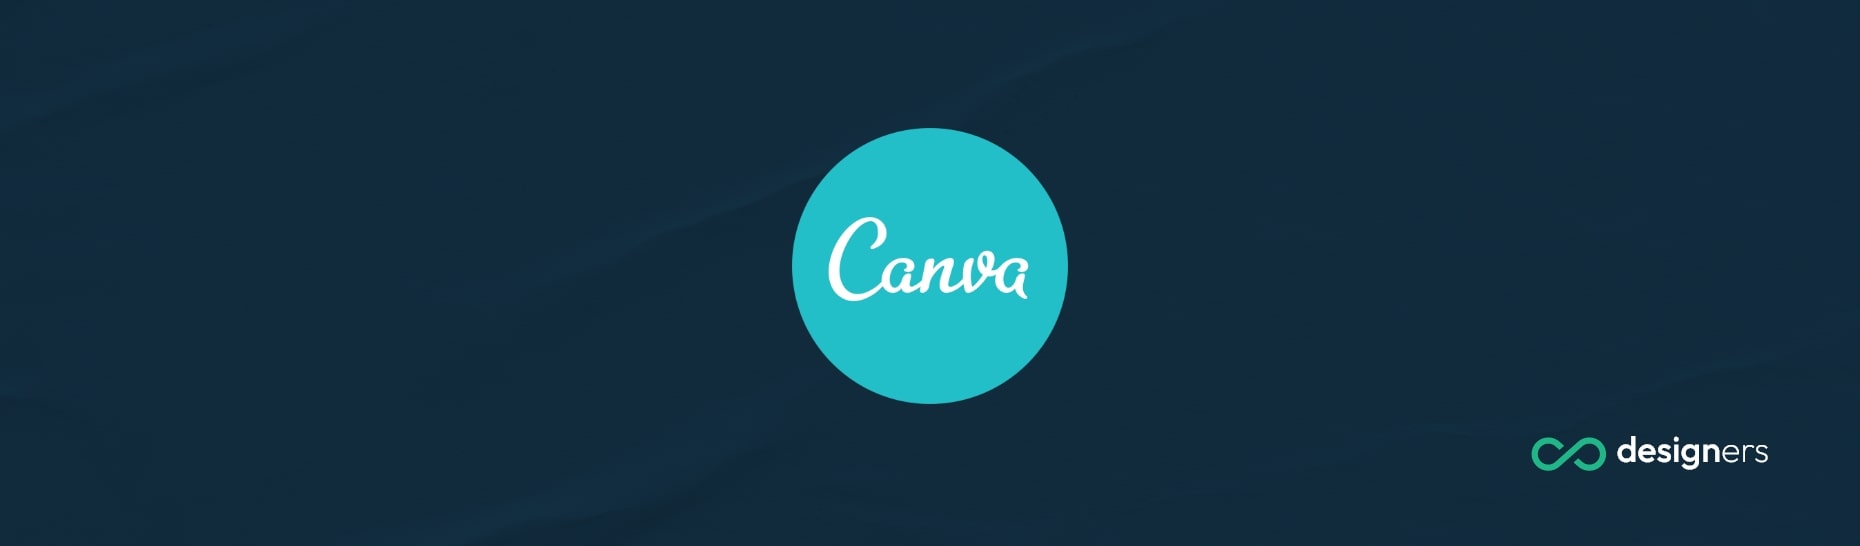 How Do I Remove a GIF Background in Canva?